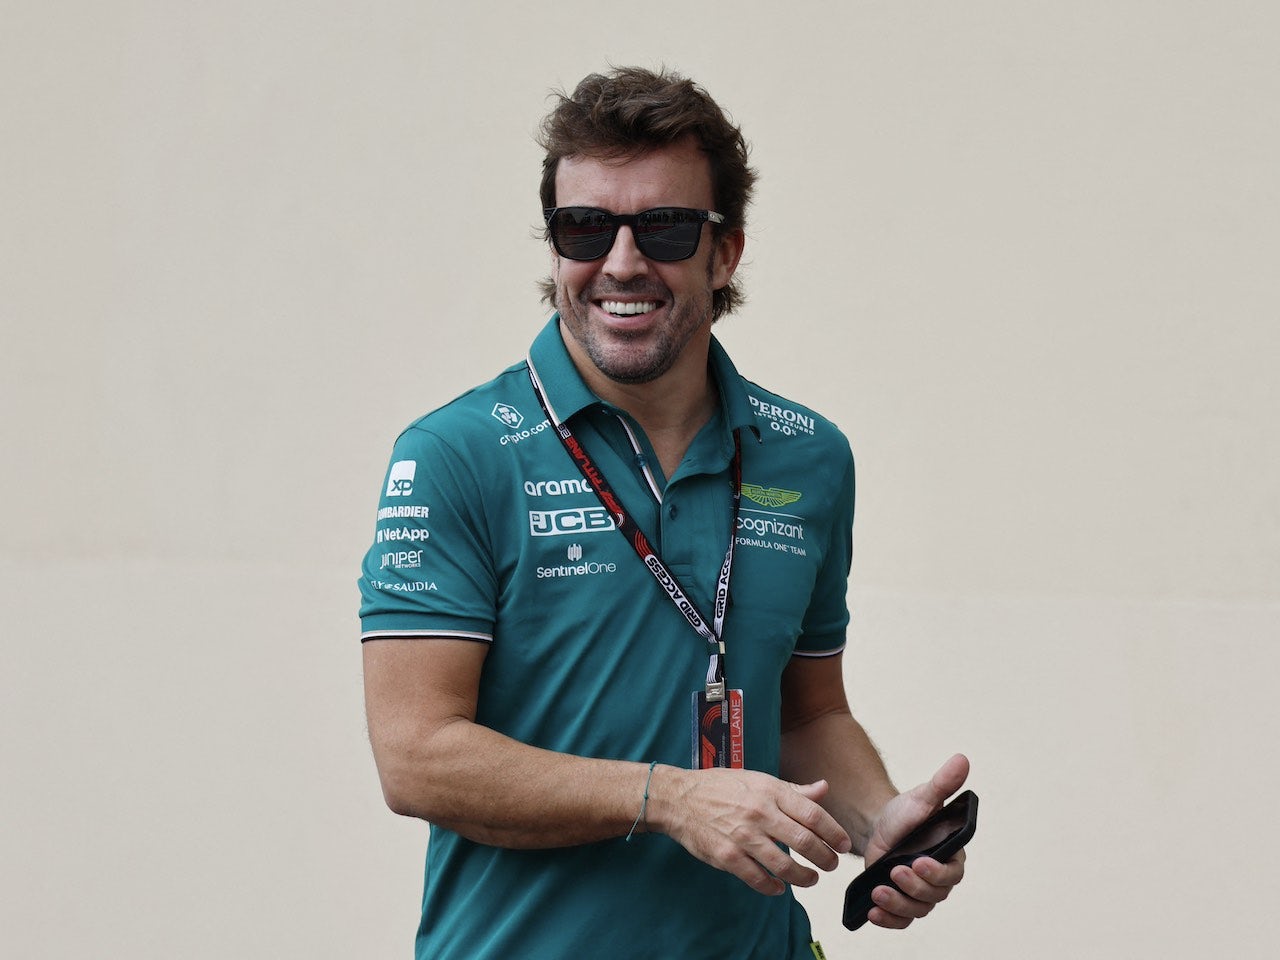 Alonso fires up Mercedes rumours at Aston Martin launch